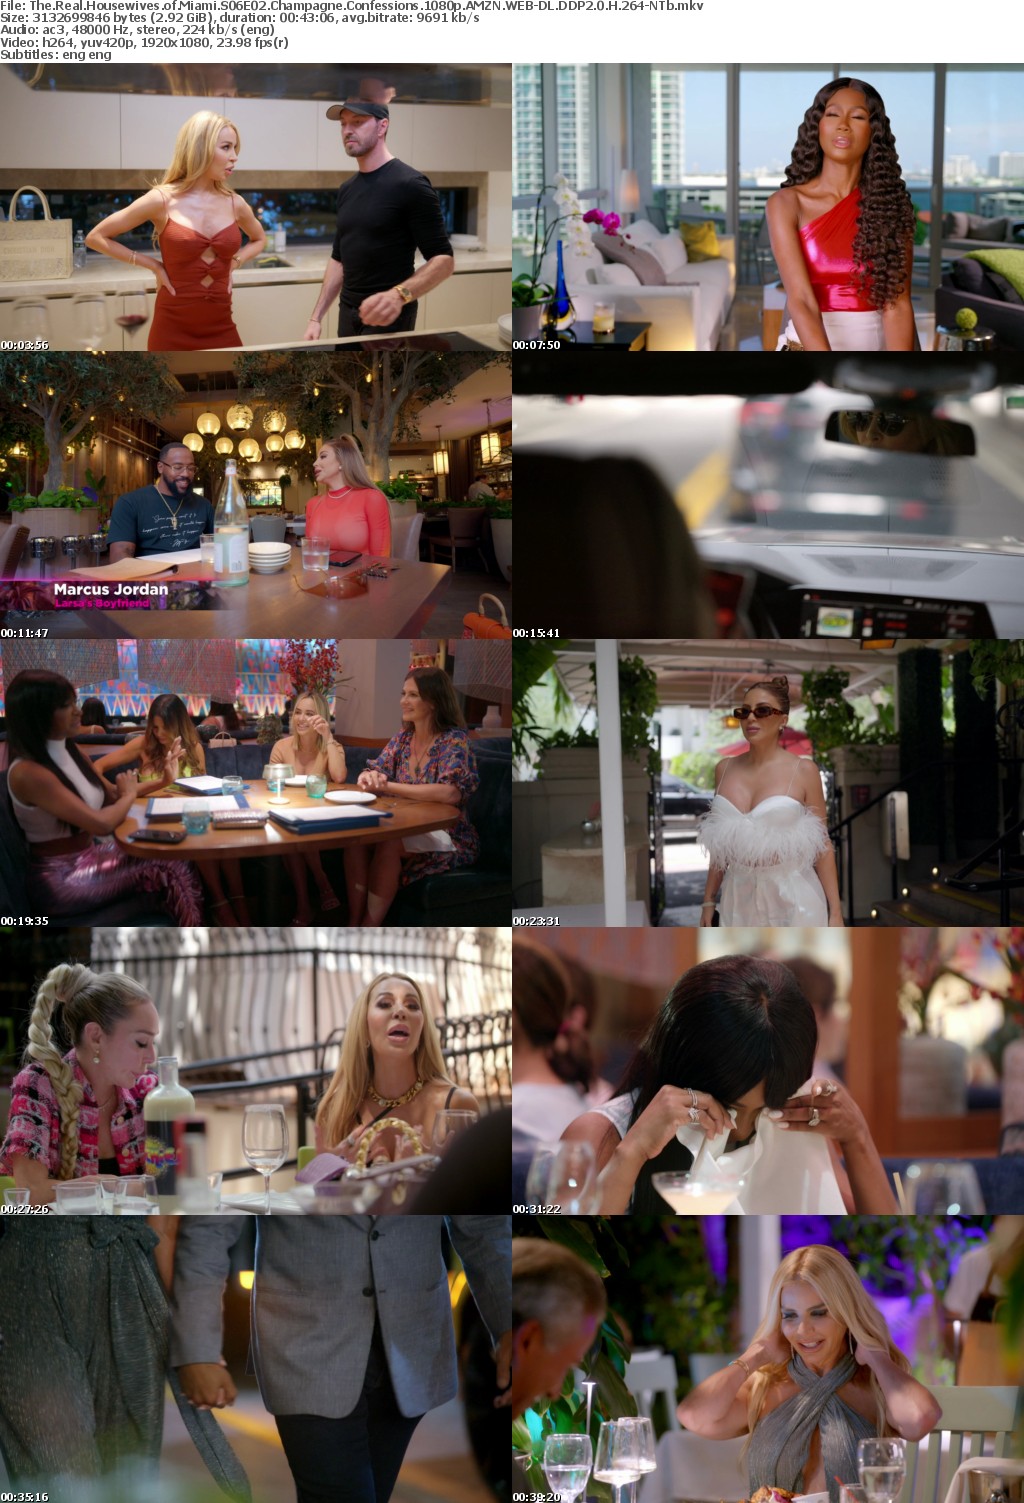 The Real Housewives of Miami S06E02 Champagne Confessions 1080p AMZN WEB-DL DDP2 0 H 264-NTb